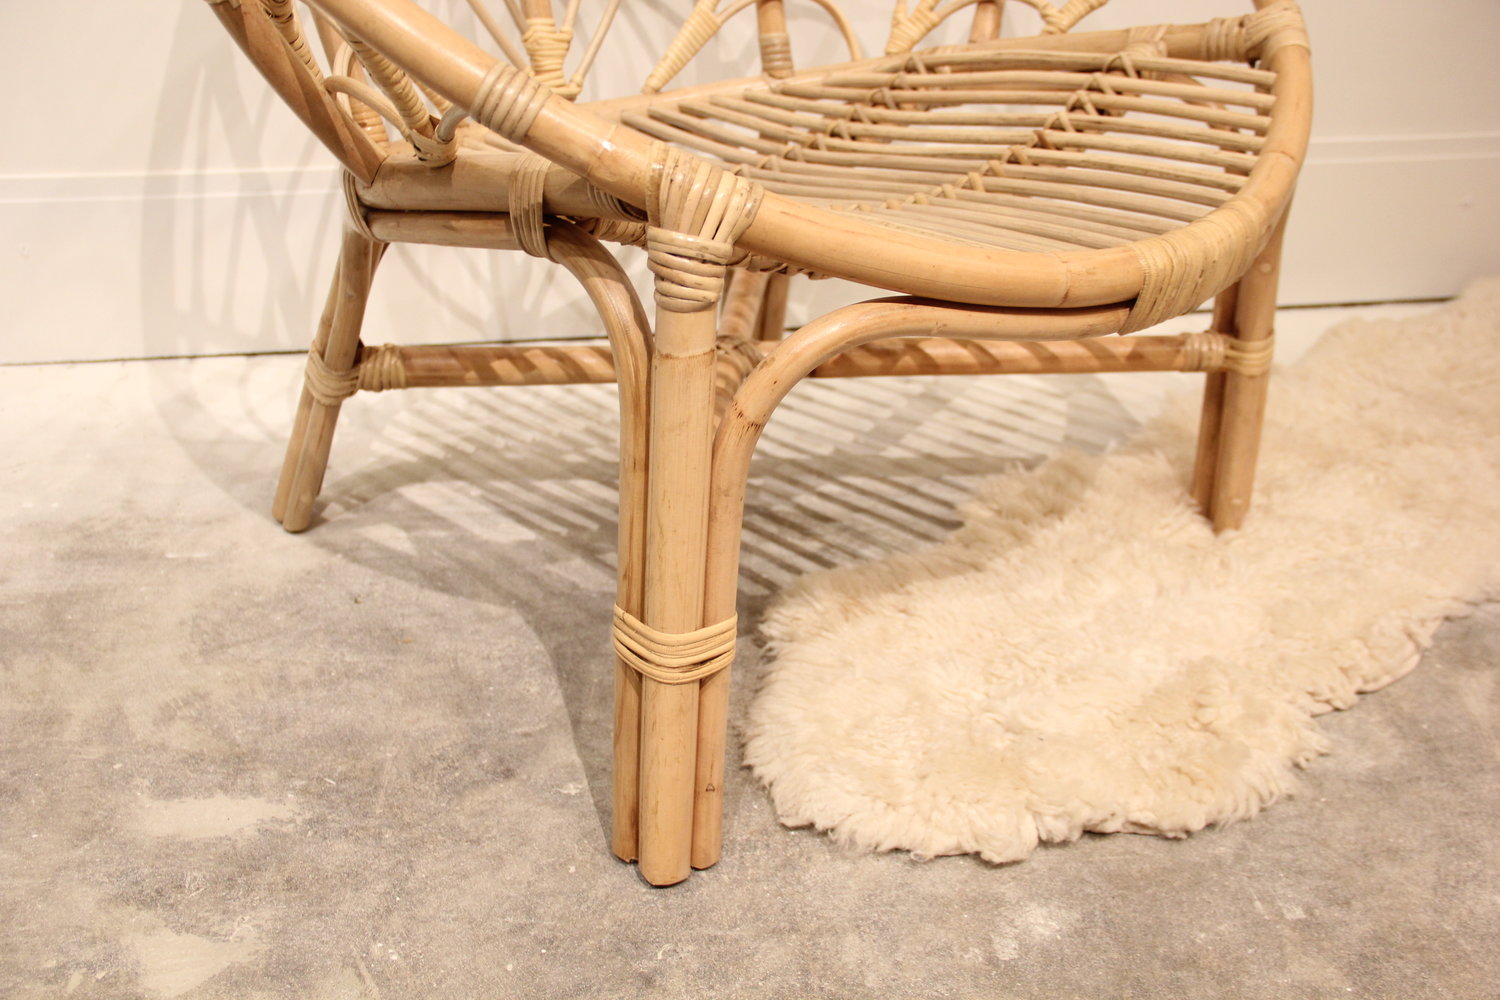 Bali Rattan Peacock Chair Natural Sample Sale Last One The